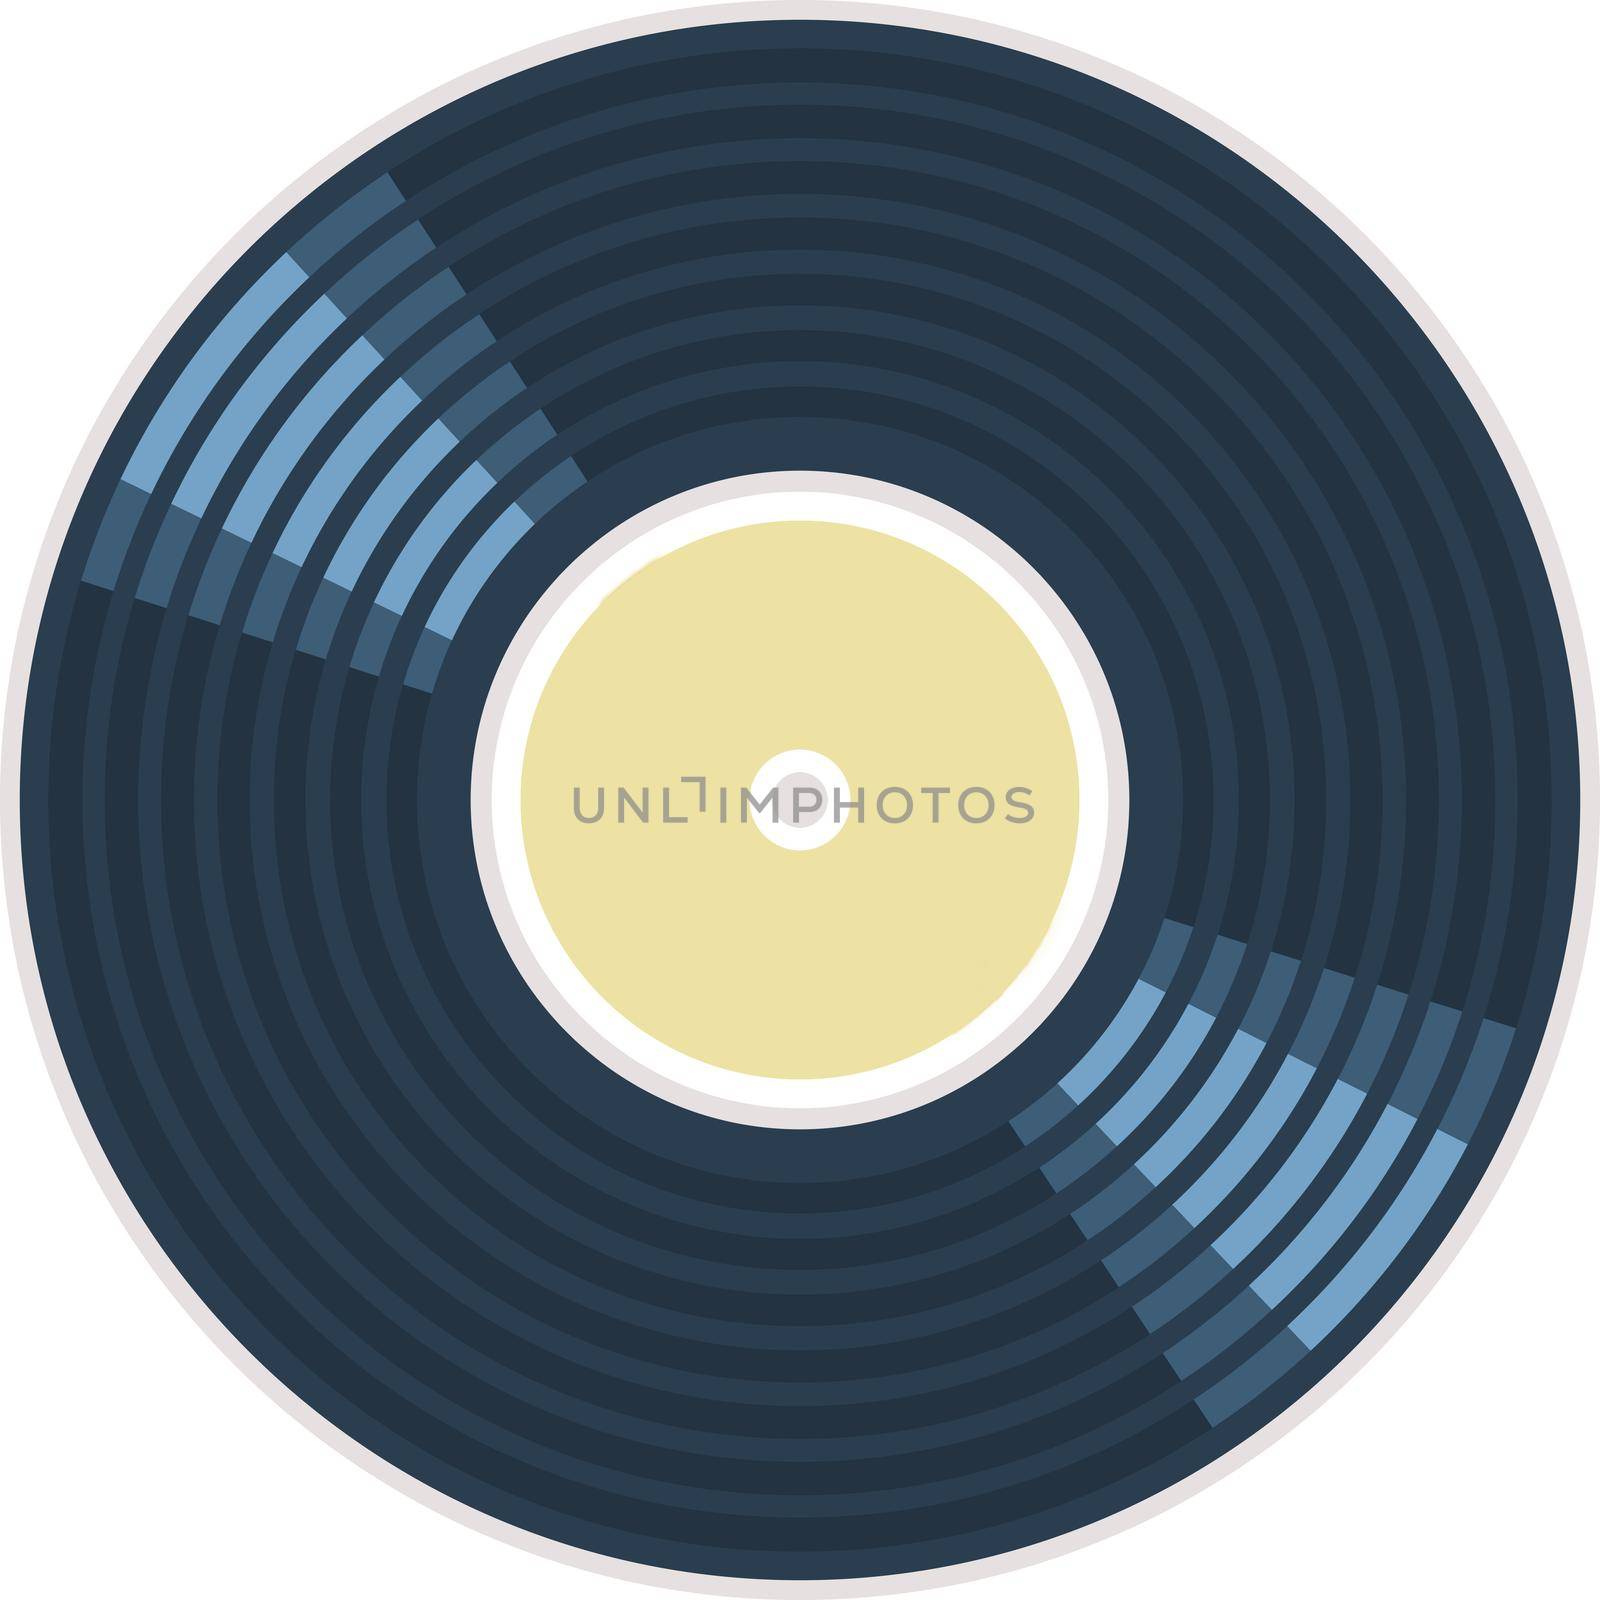 Vinyl record isolated on a white background by Mastak80